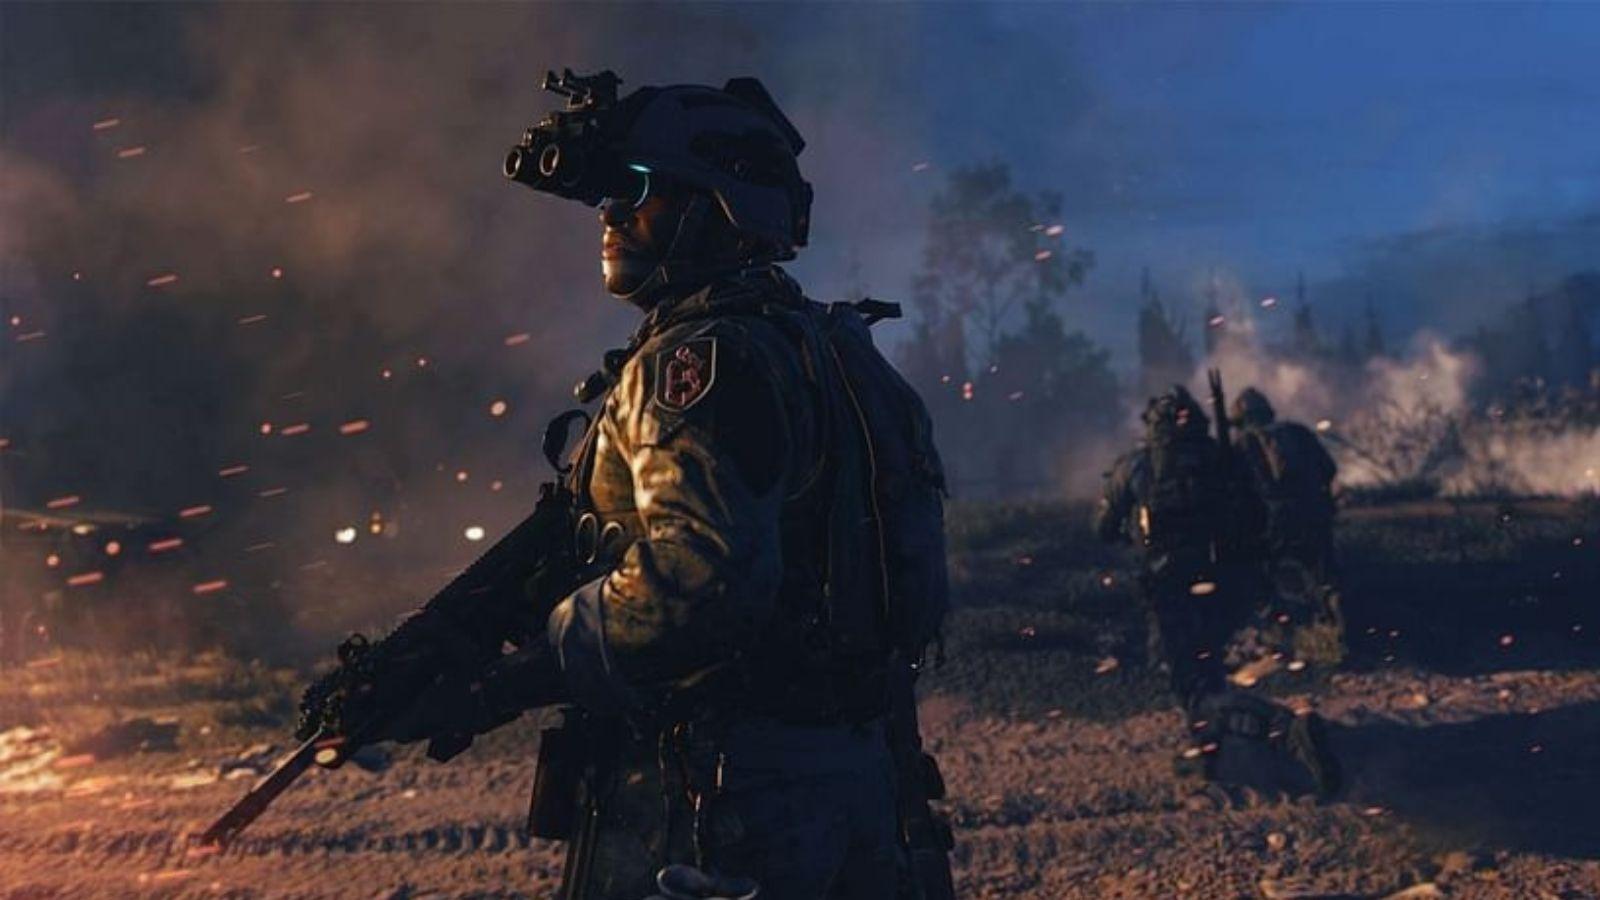 Call of Duty: Modern Warfare 3's campaign is getting savage